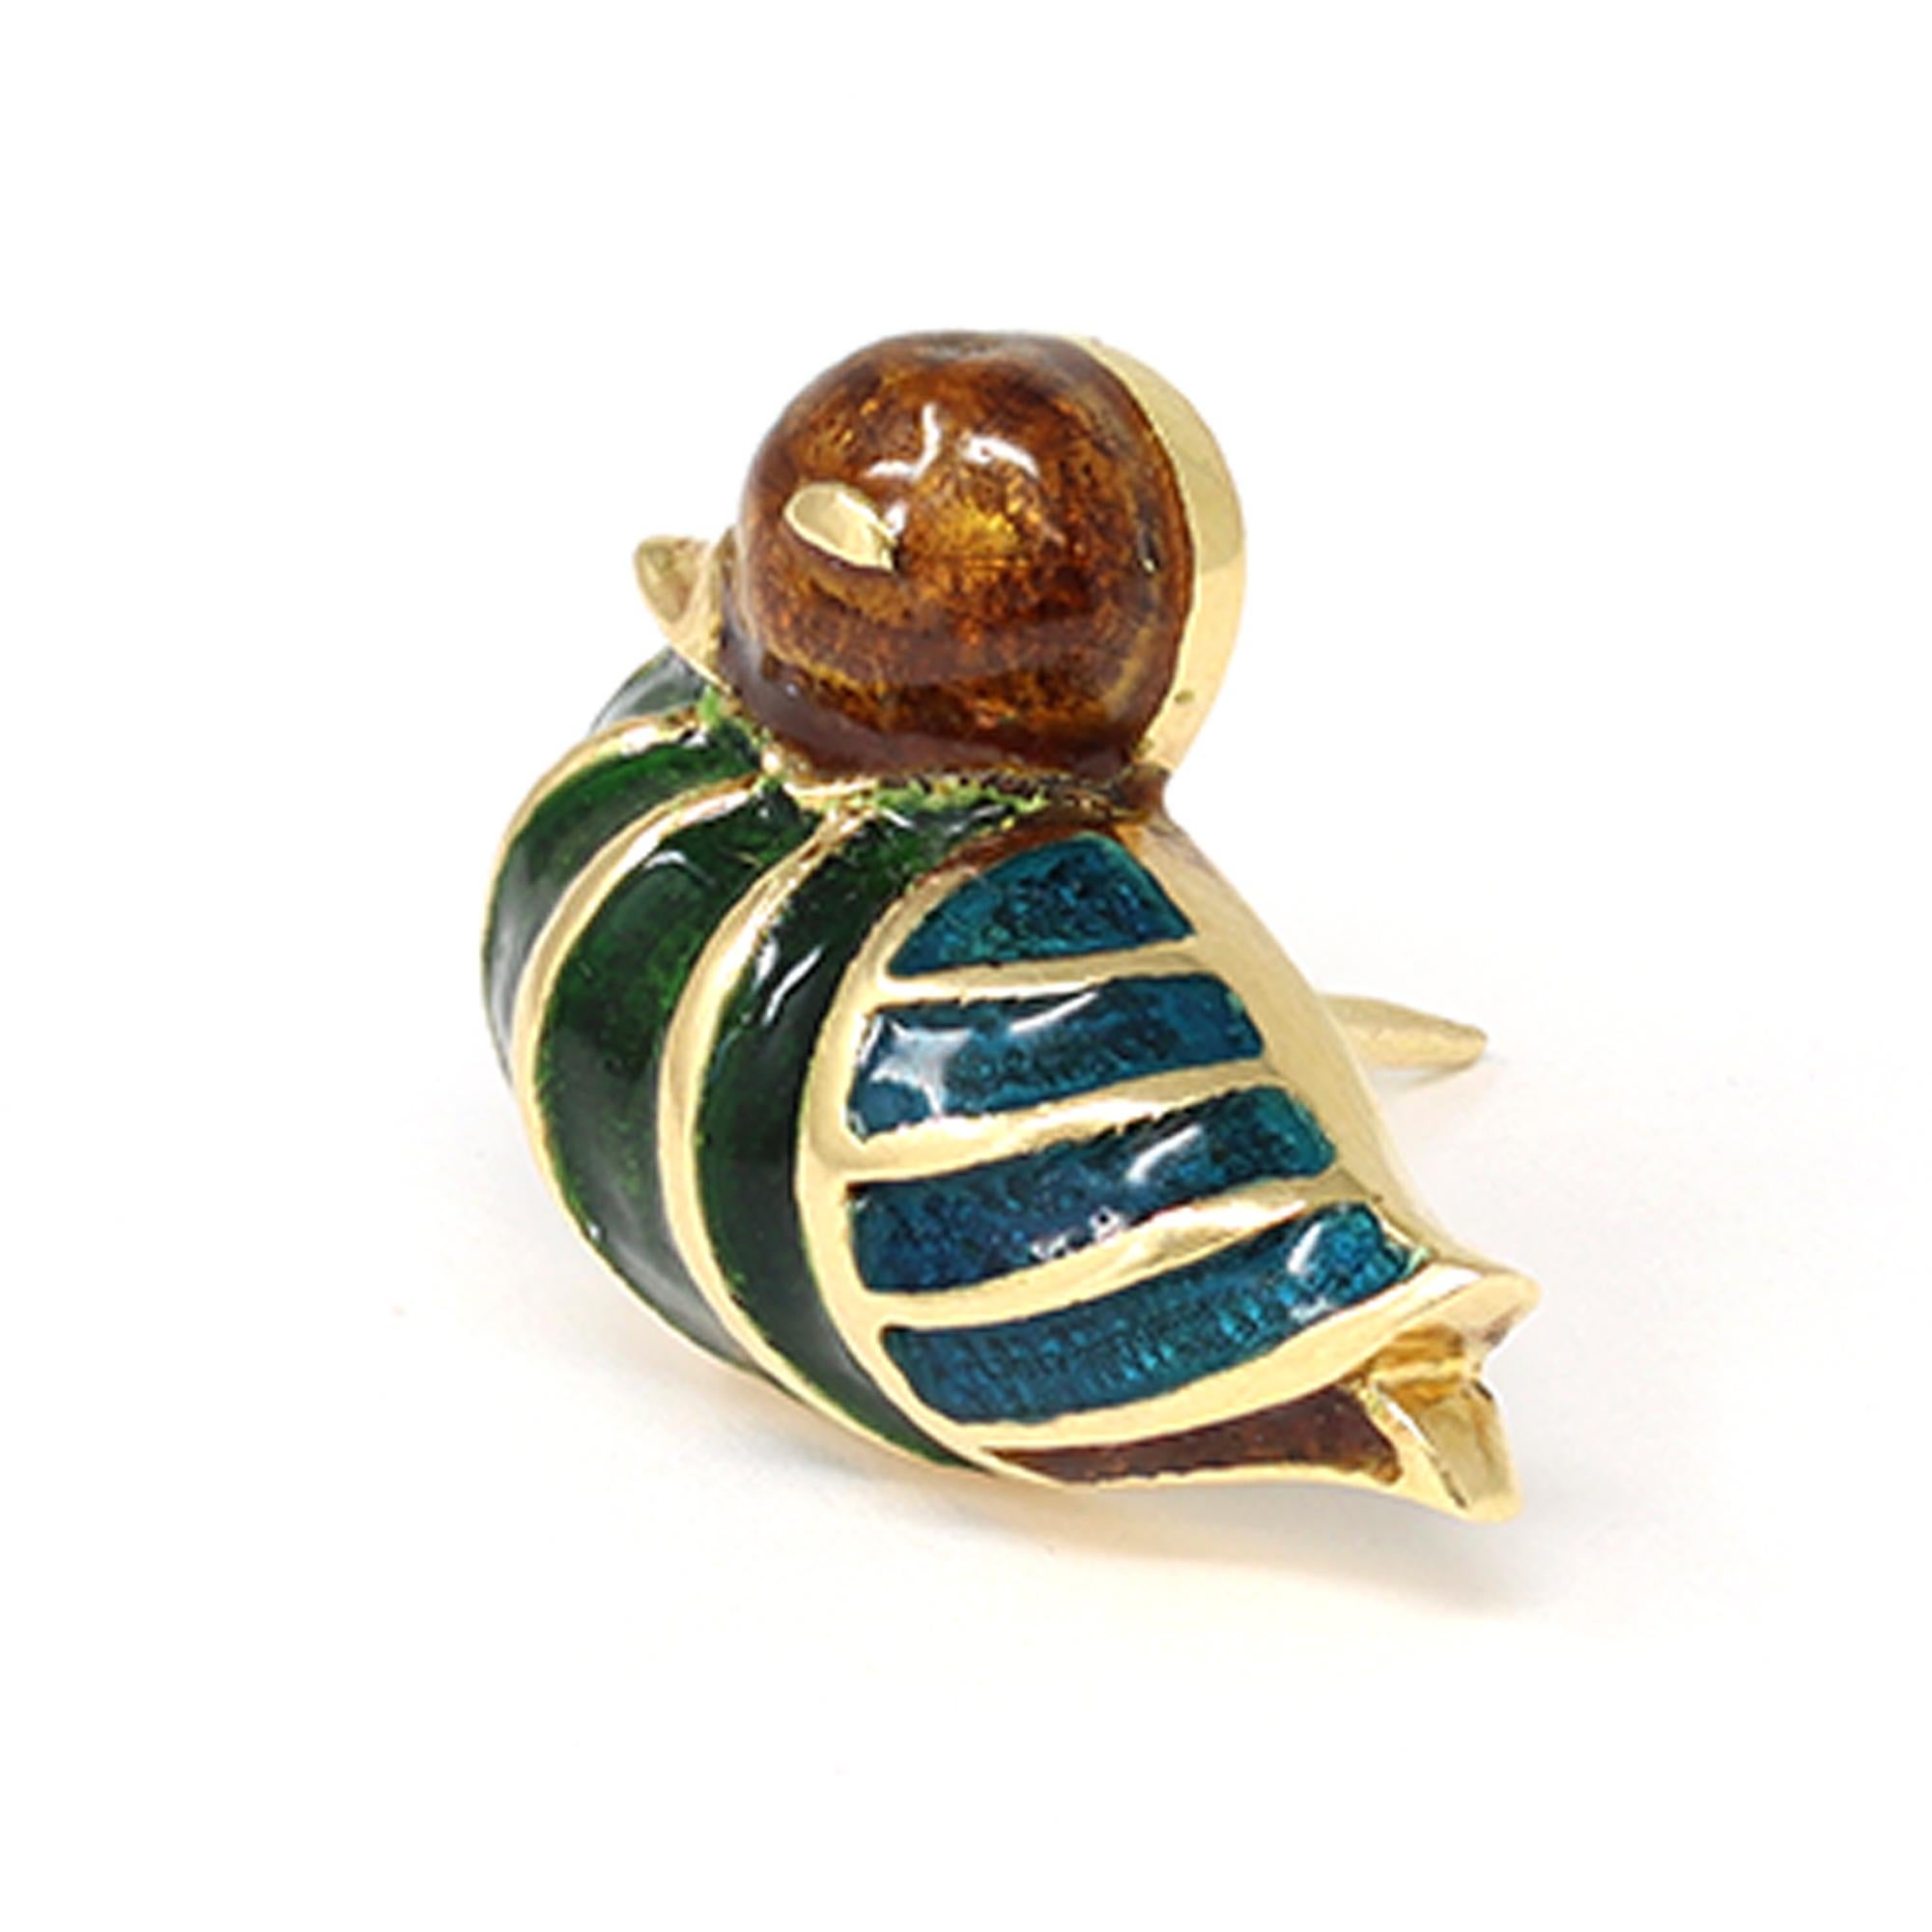 A one a kind vintage duck pin signed by the iconic house of jewelry Boucheron Paris. The elegant pin features an 18 karat yellow gold enameled little duck in green and blue stripes. It is signed and numbered and has a gross weight of 6 grams. It